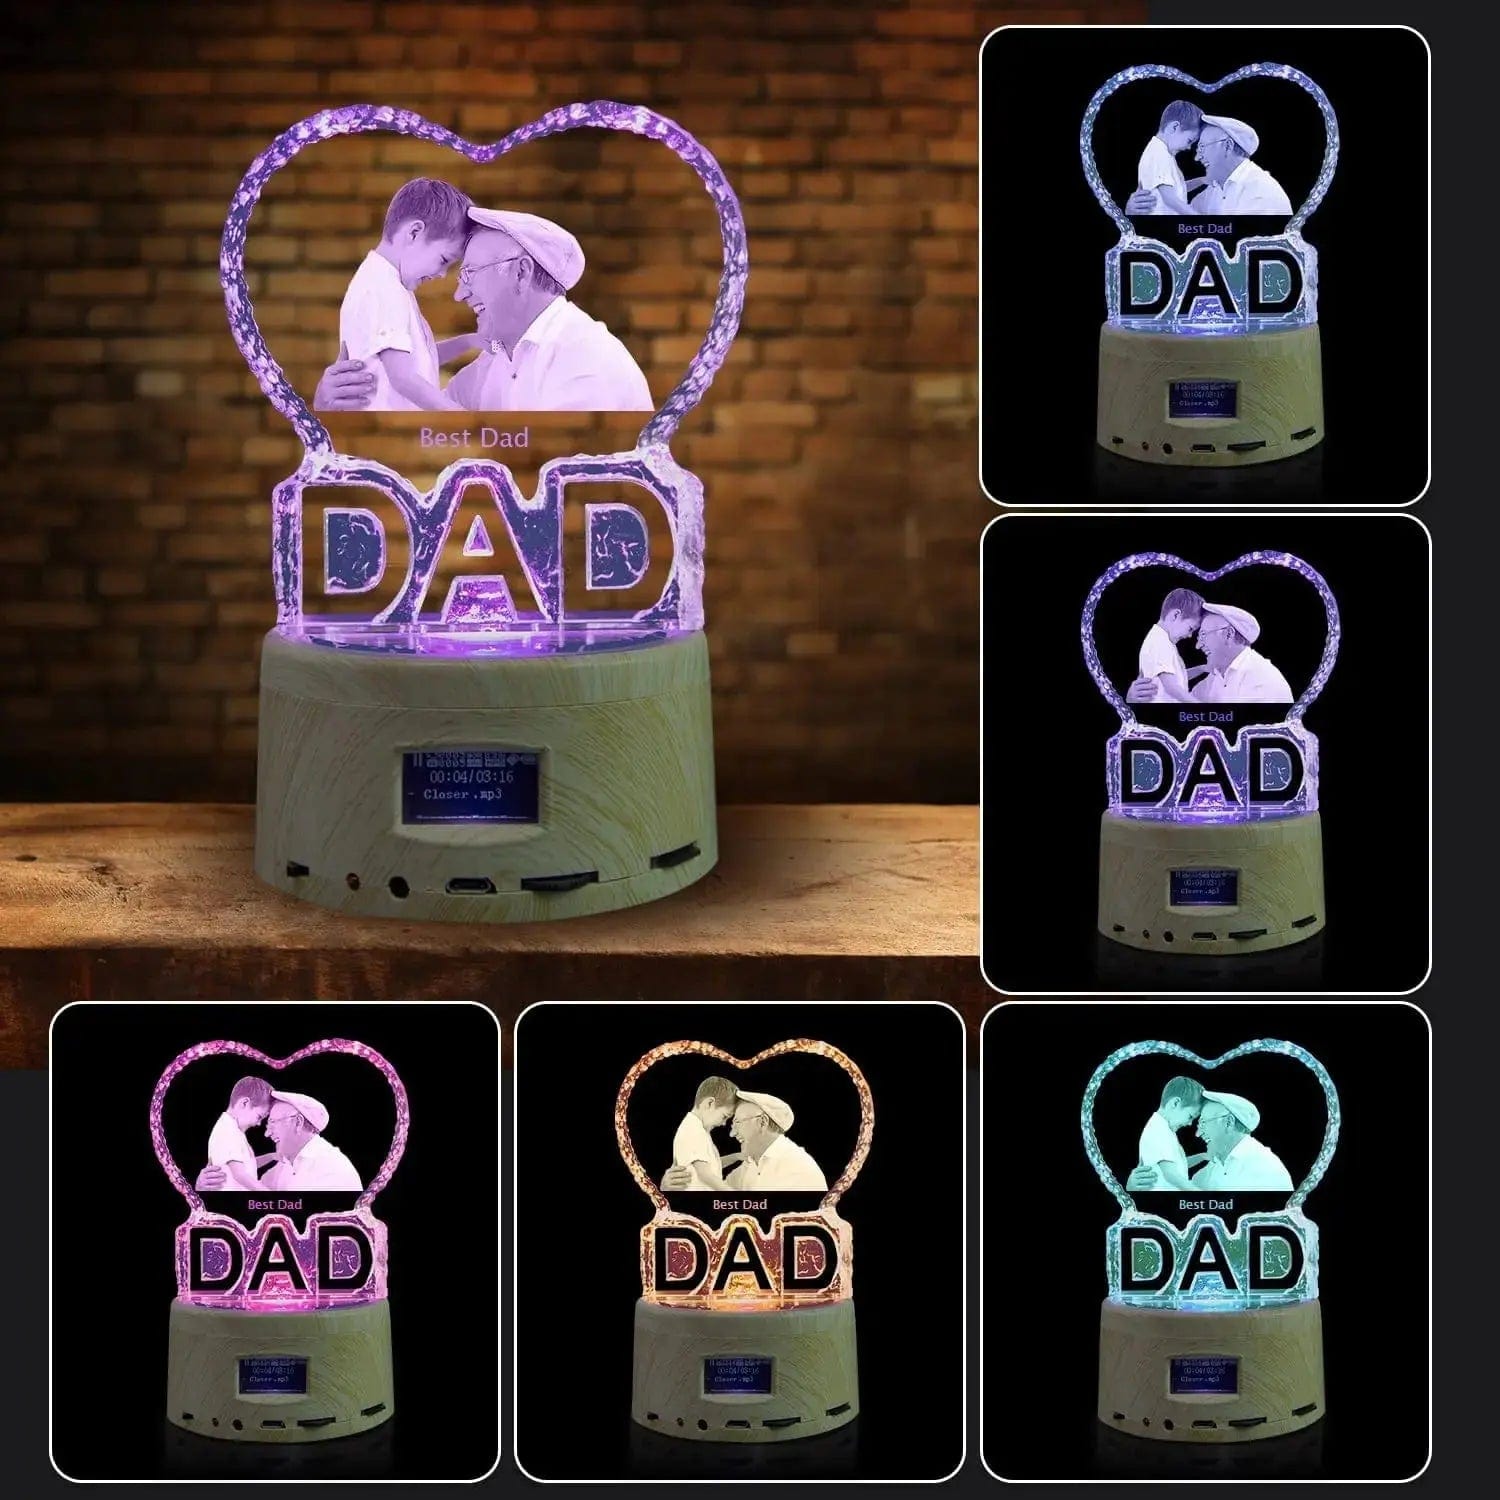 Love Crystal Picture Text Night Light - Essentialshouses